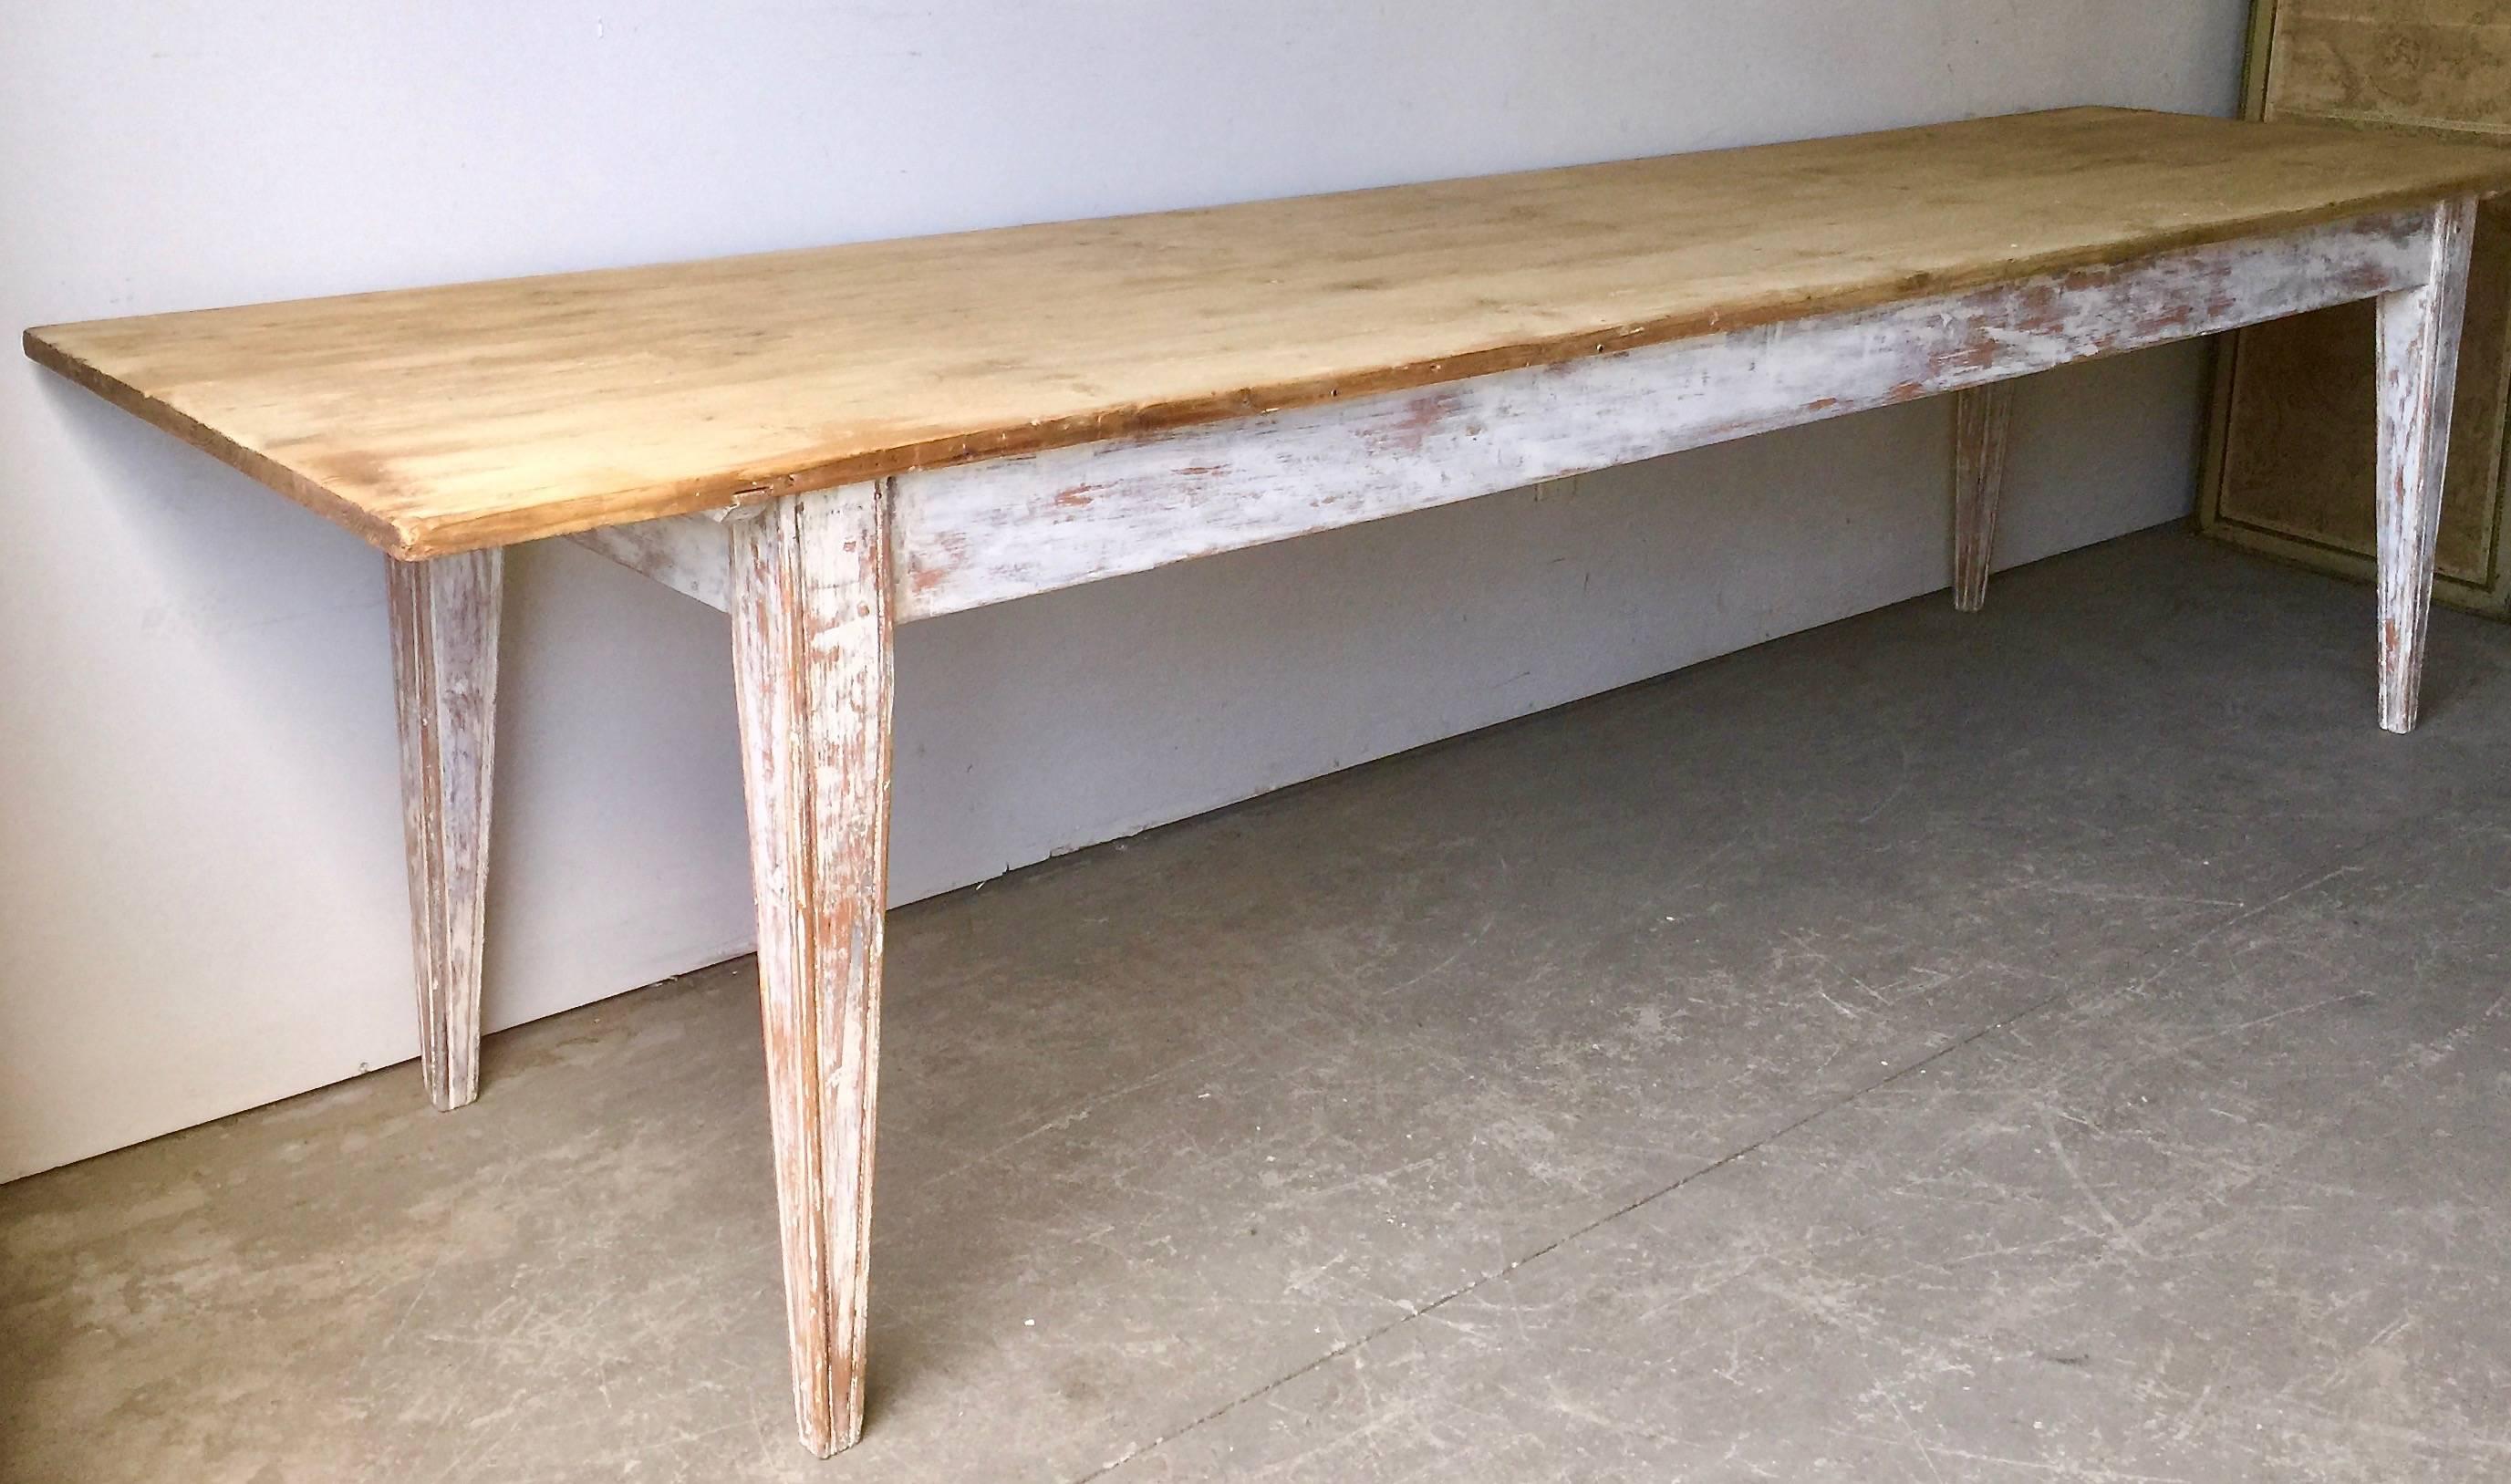 Large French country table with painted legs and nicely patinated natural pine top, France, late 19th/1900 century. 
Surprising pieces and objects, authentic, decorative and rare items. Discover them all.